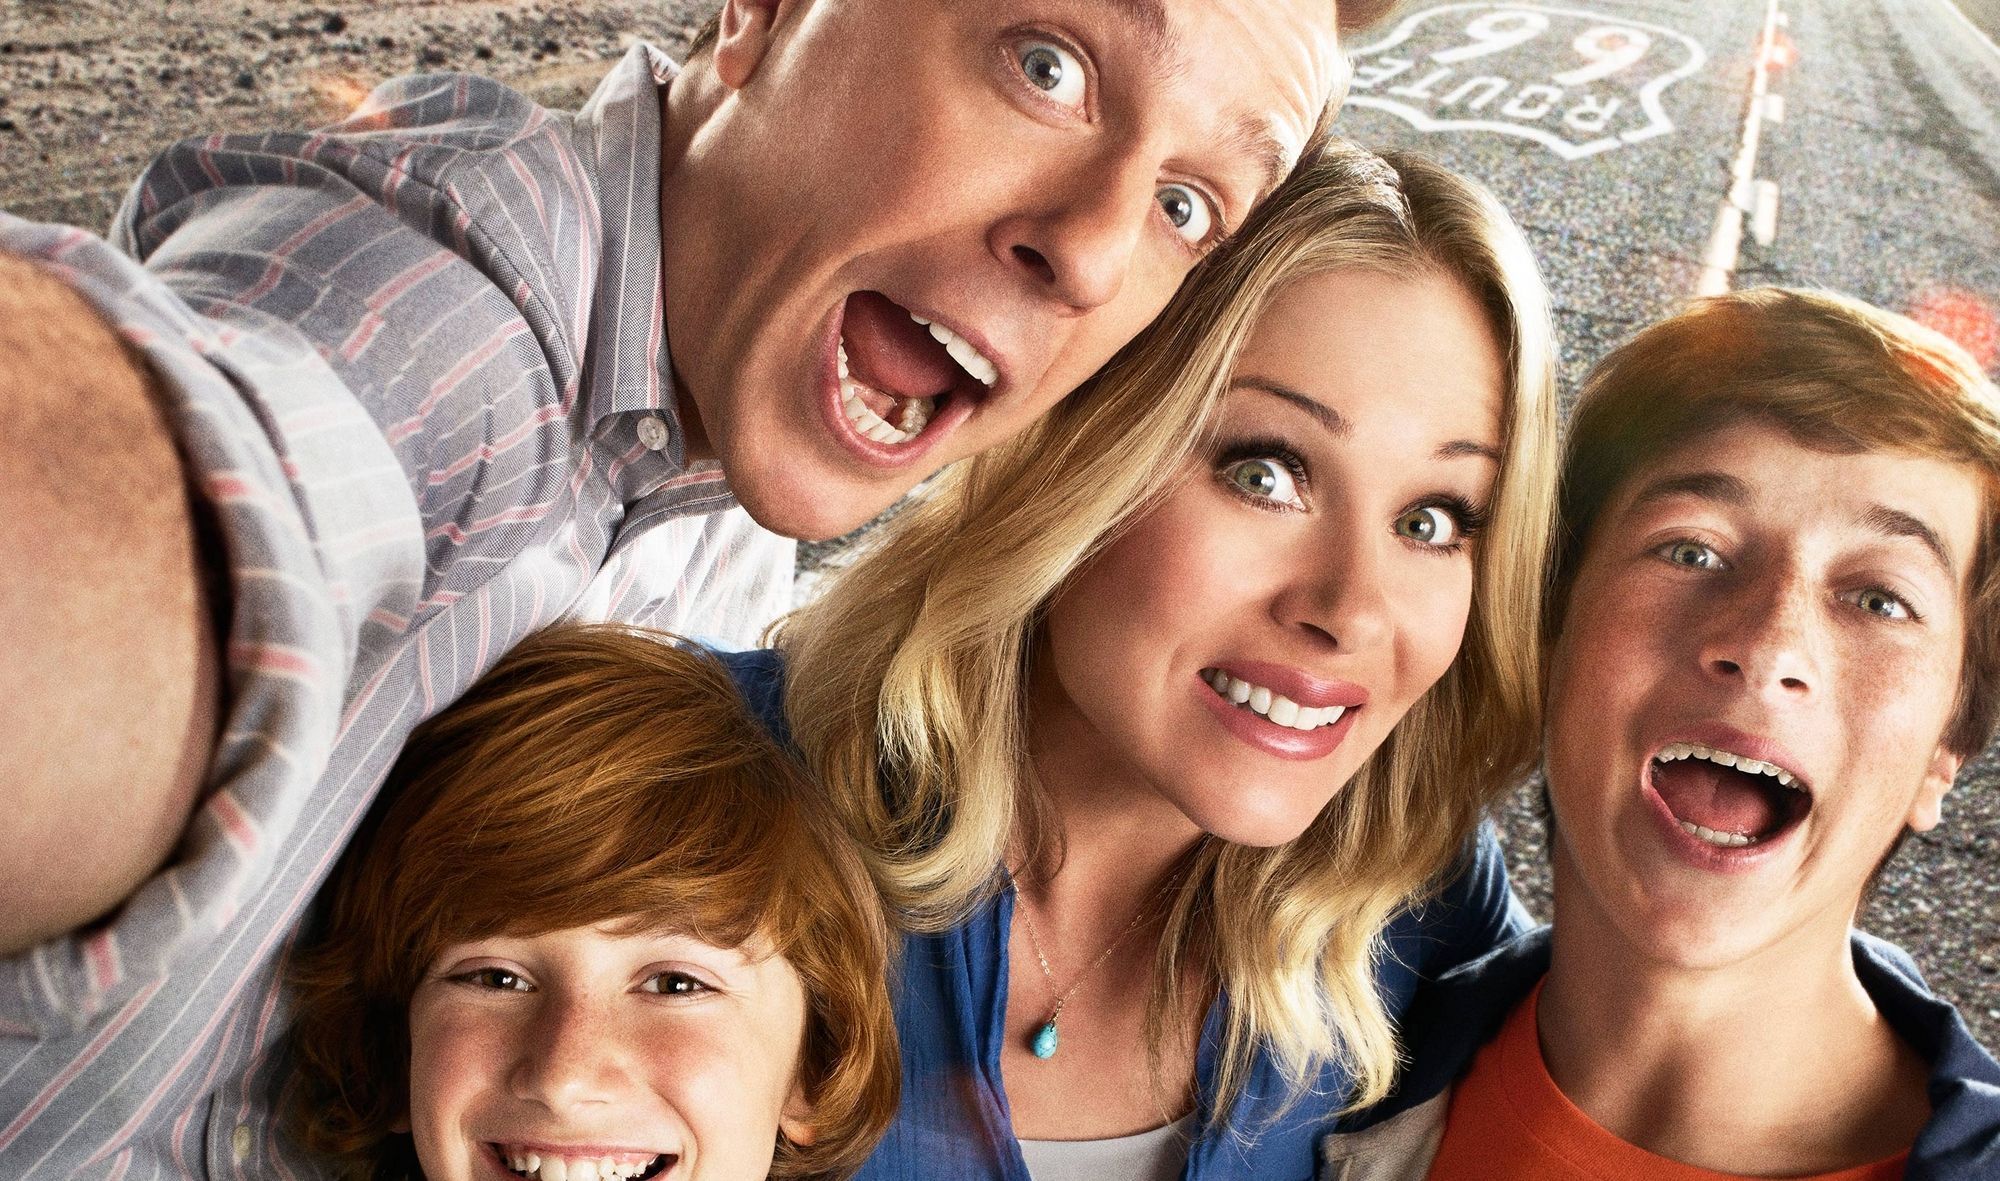 Vacation 2015 Movie Review